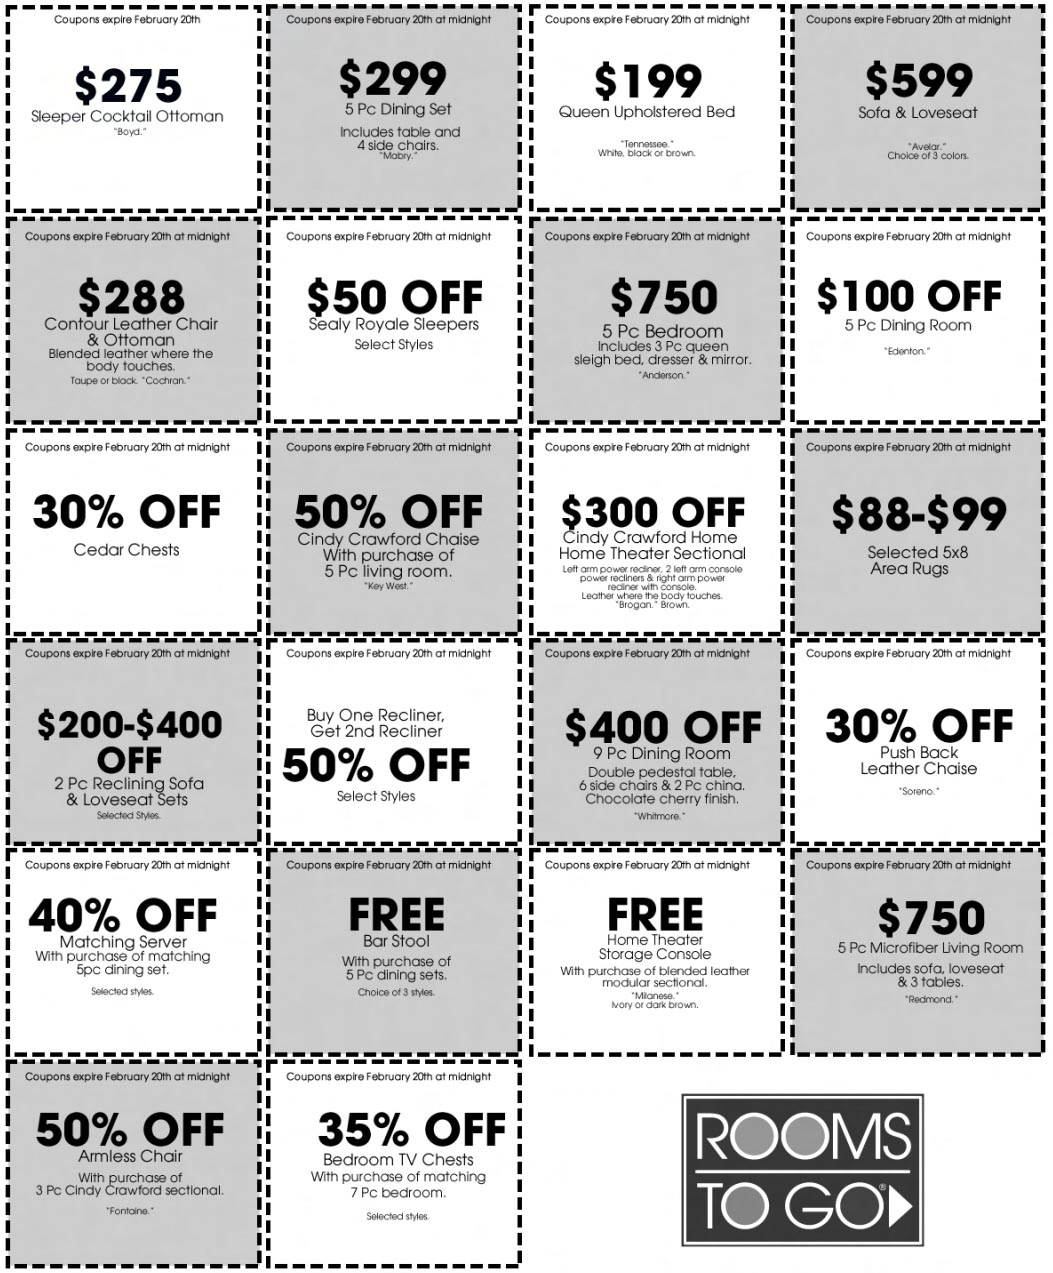 Rooms To Go Promo Coupon Codes and Printable Coupons